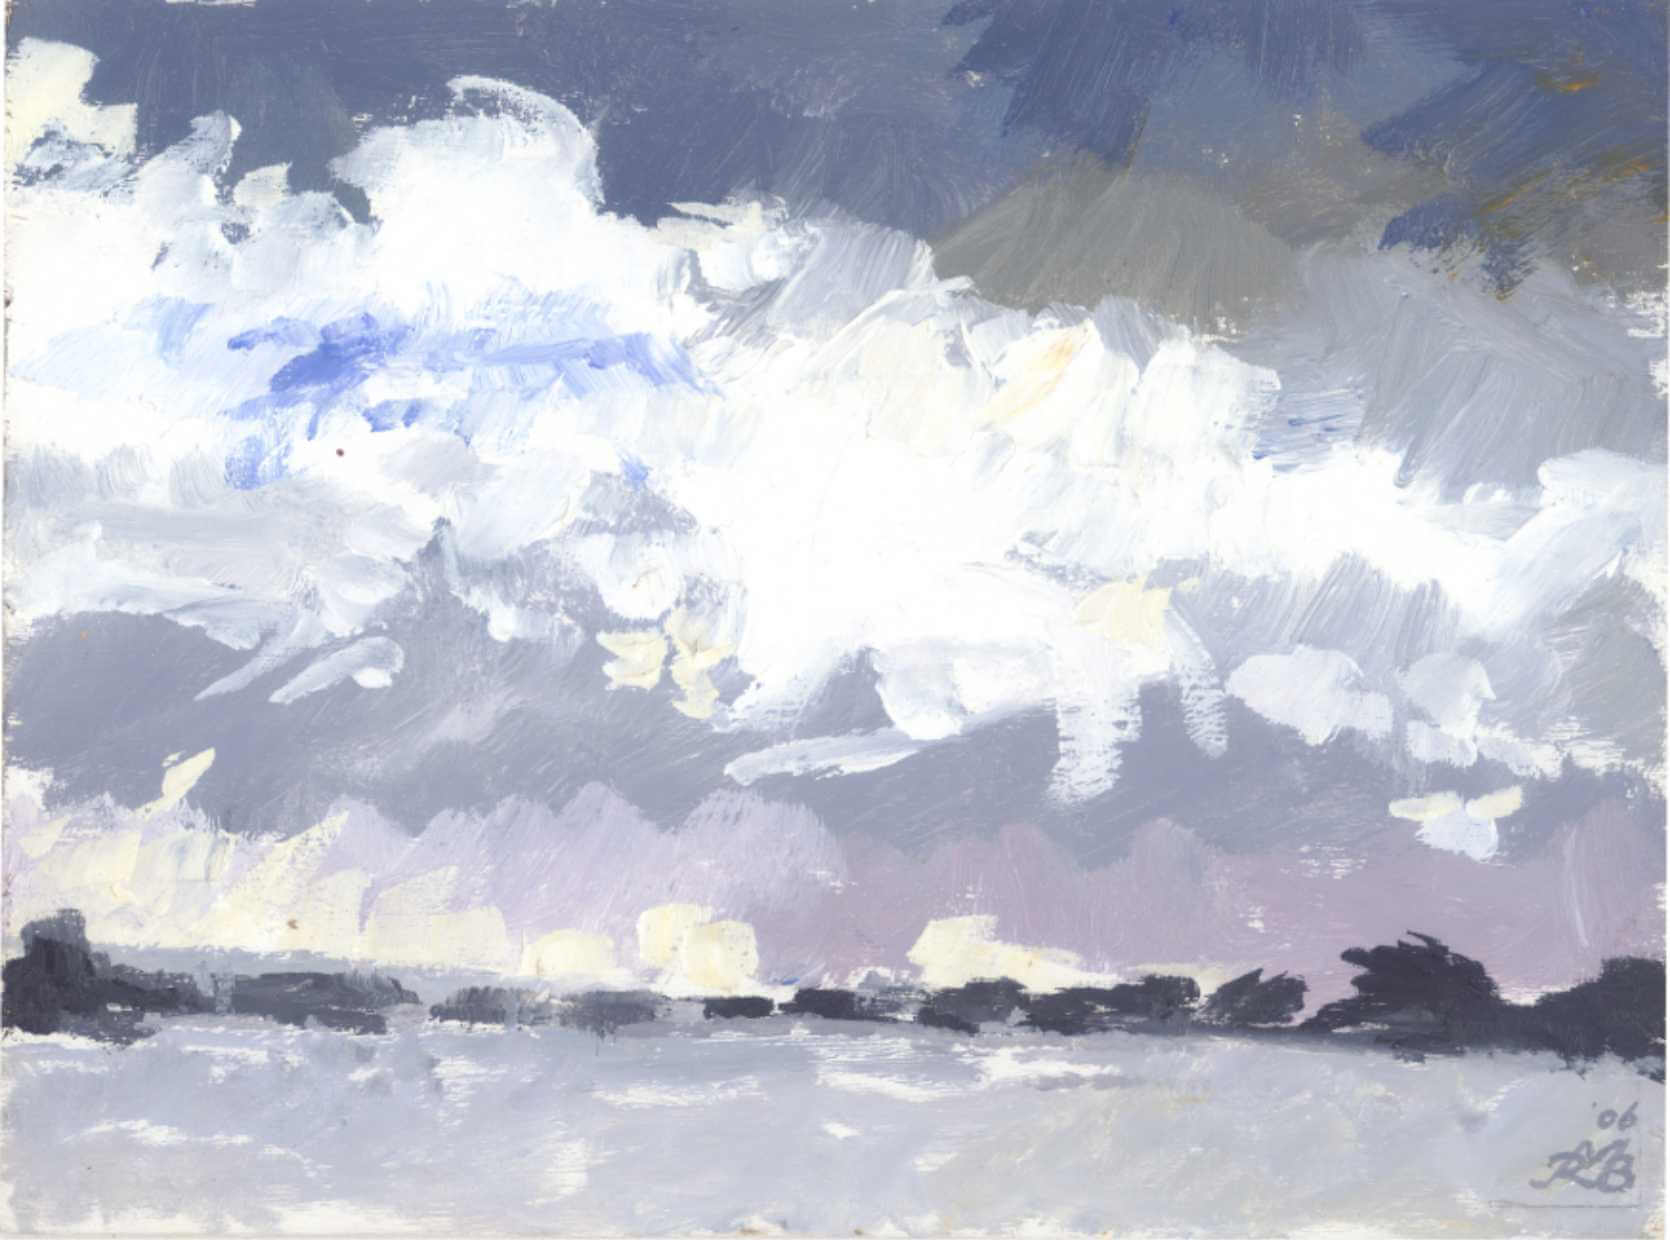 2006 Approaching Snowstorm (Sketch)